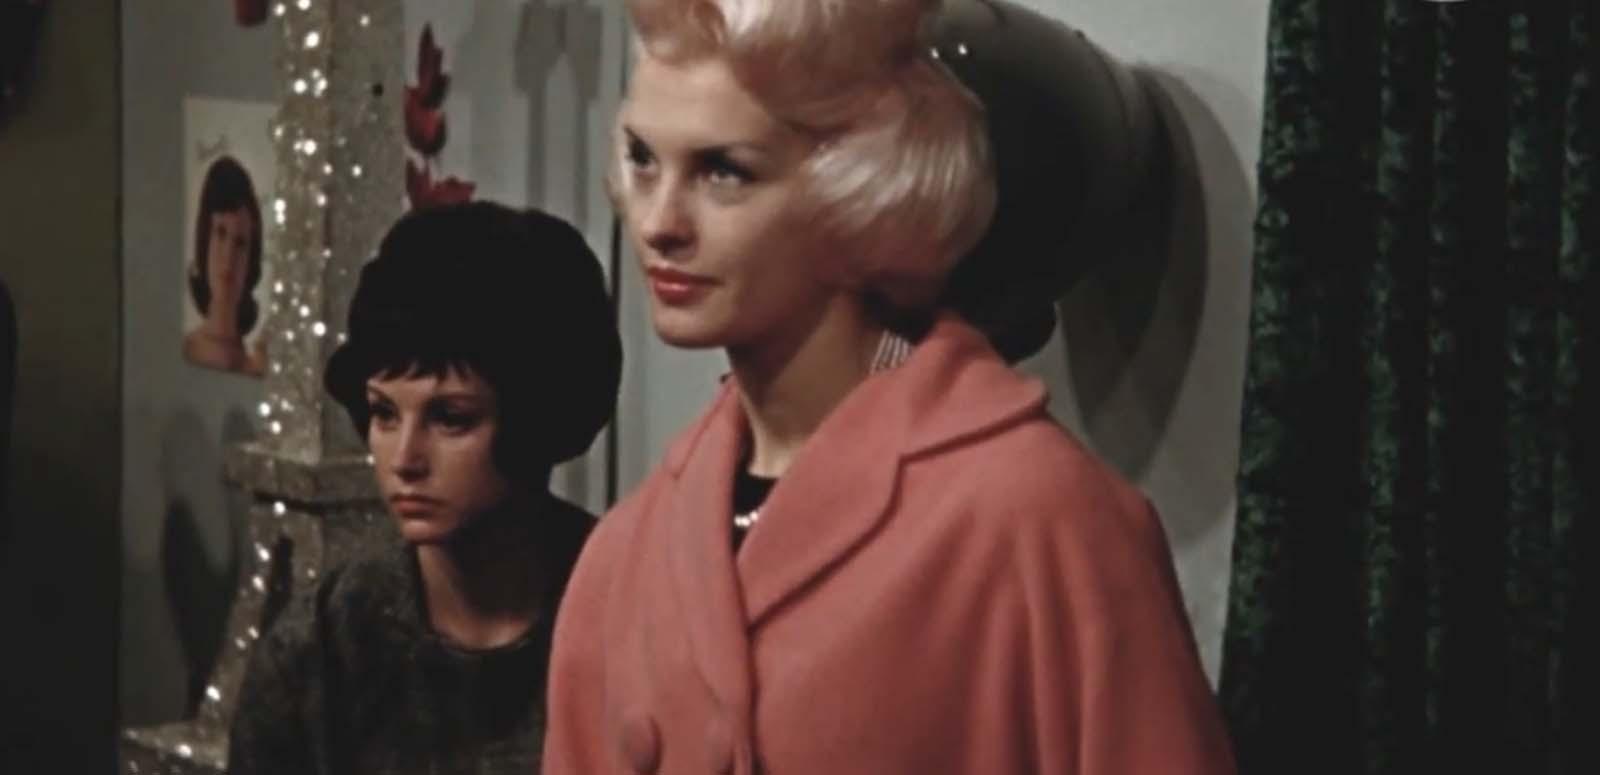 Two women at a 1950s hairdressing convention